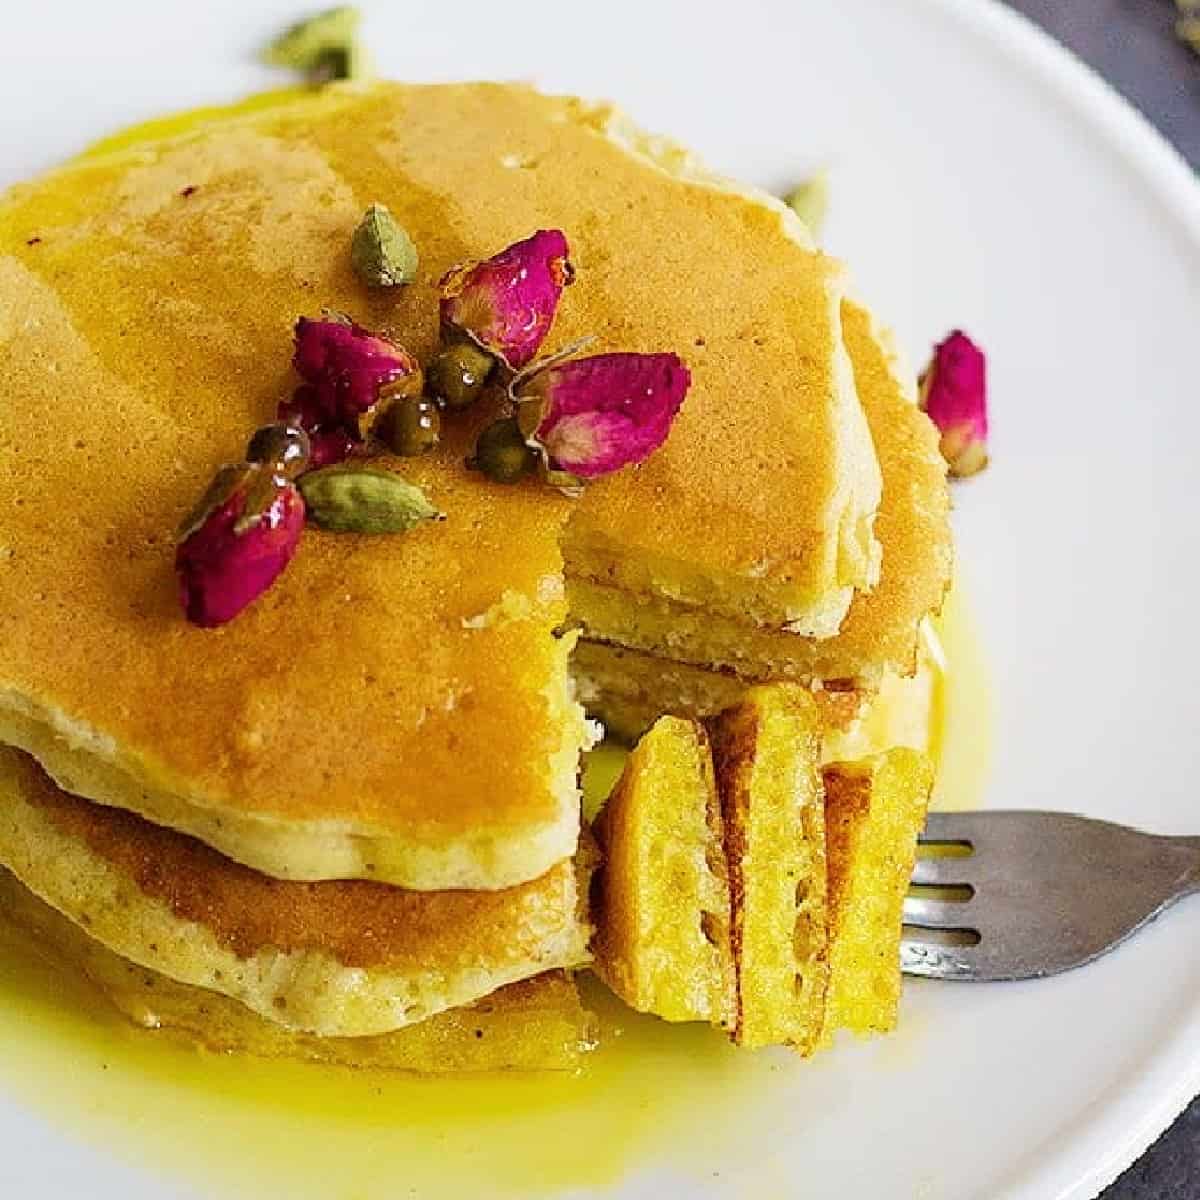 A classic American recipe with a Persian twist, these rosewater cardamom pancakes with saffron syrup are the love between east and west. The fluffy pancakes with rose and cardamom aroma kissed by saffron syrup, a dream come true! 
